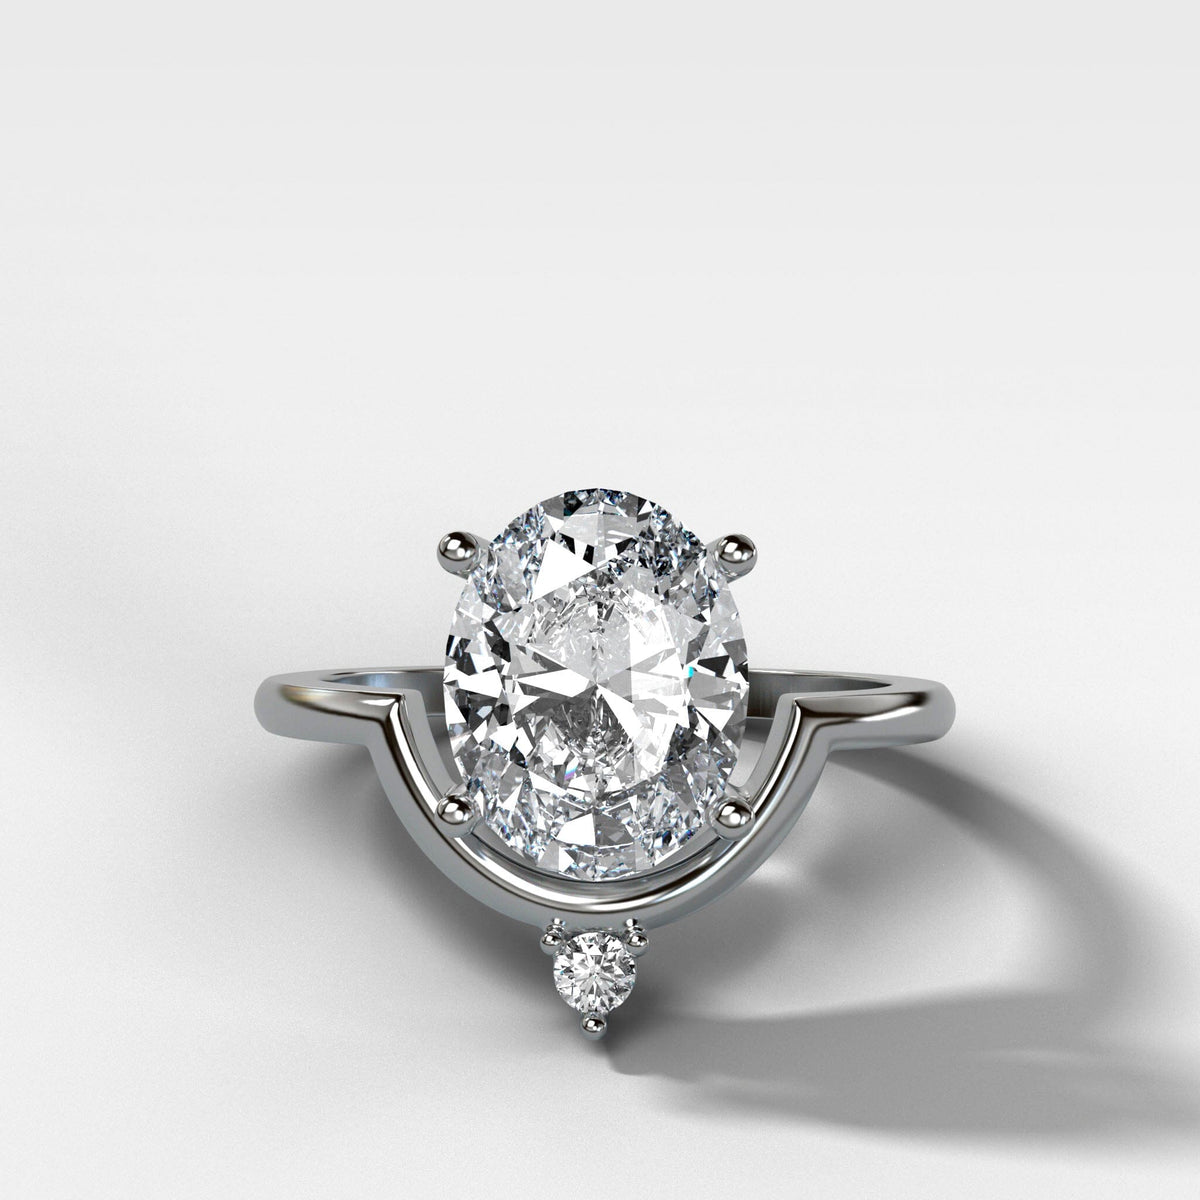 Taurus Engagement Ring with an Oval cut Engagement Good Stone Inc White Gold 14k 